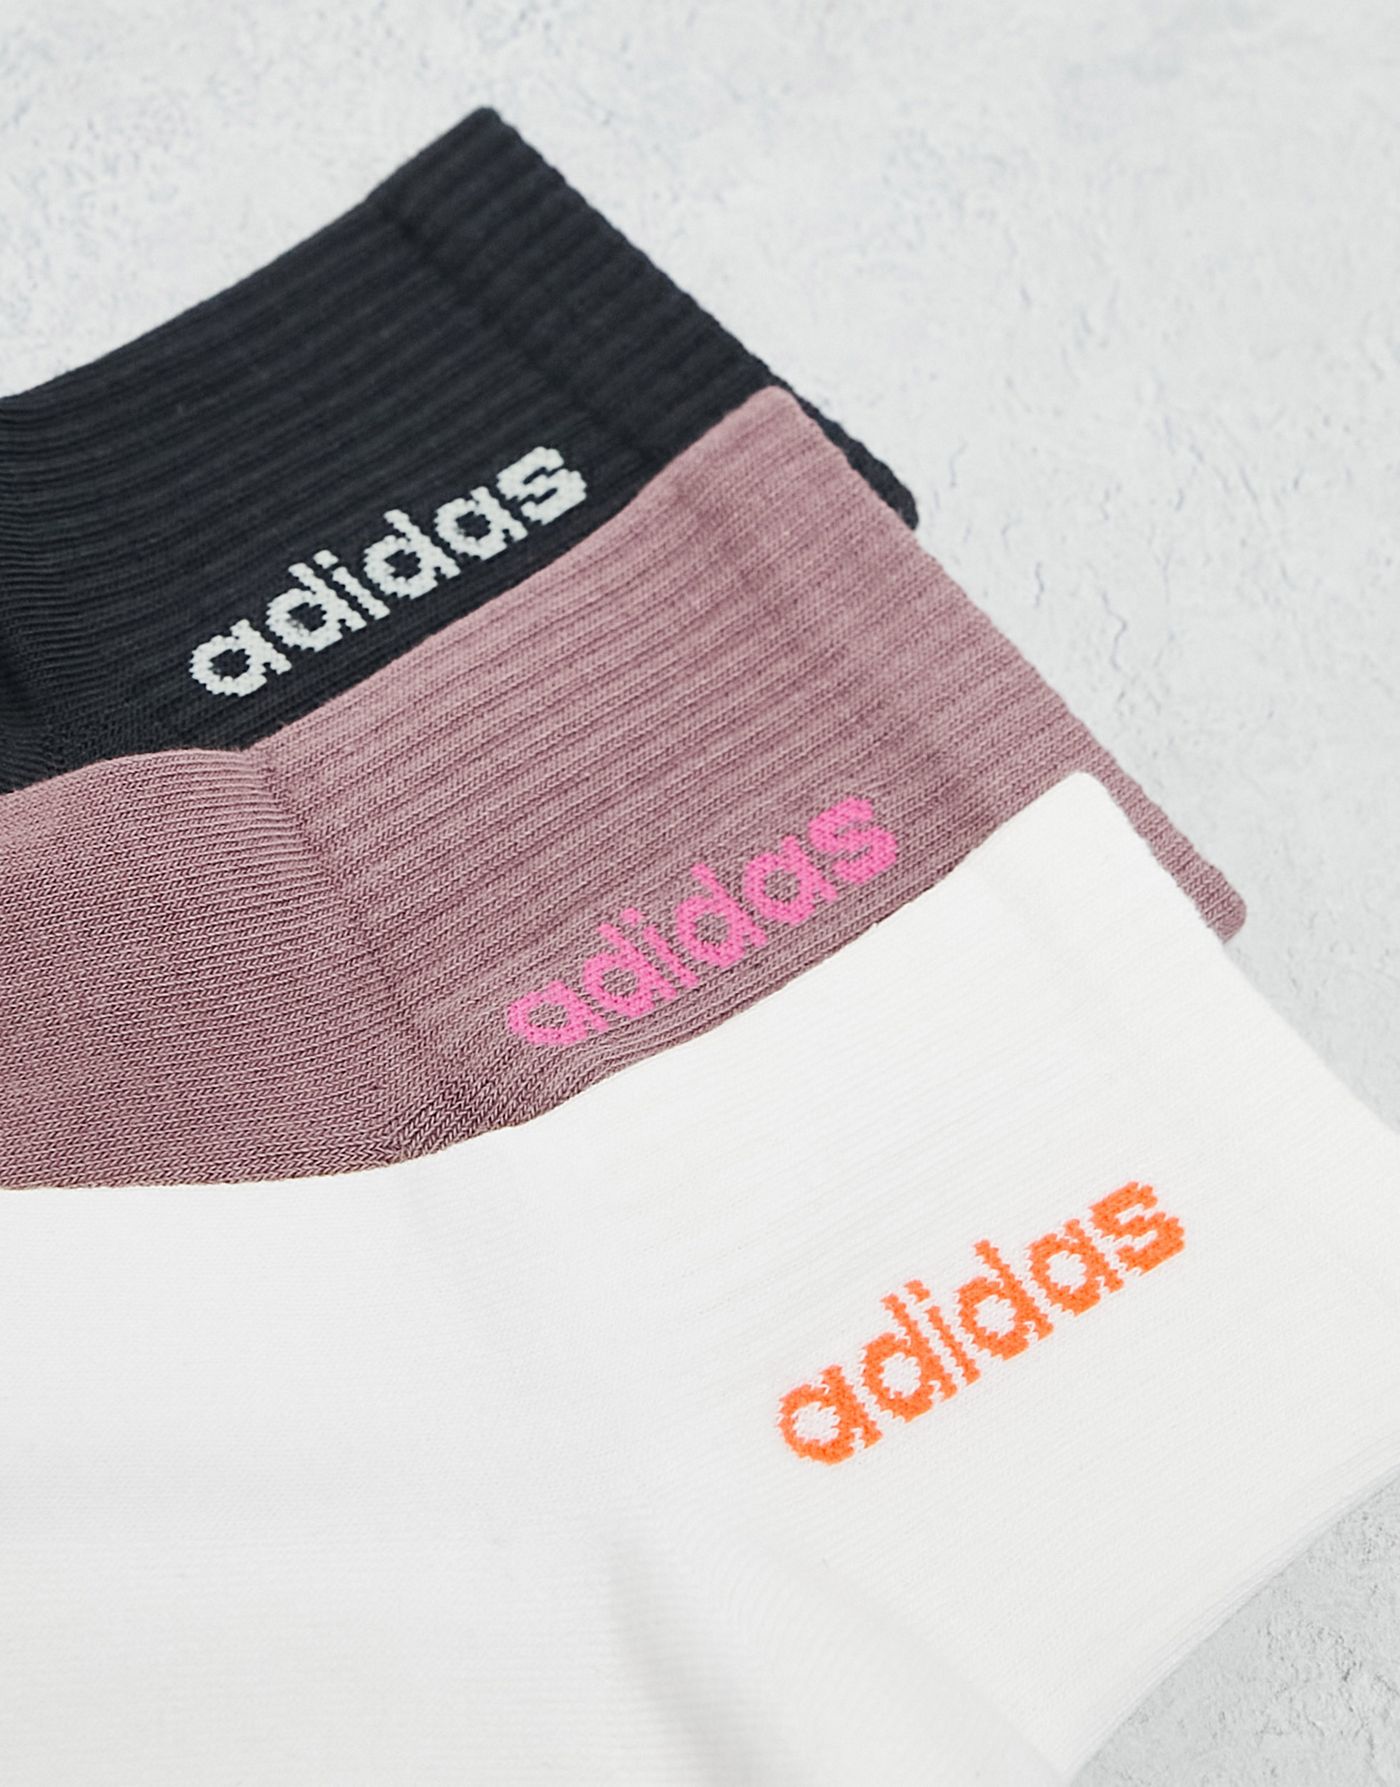 Adidas performance mid 3 pack socks in black, white and purple